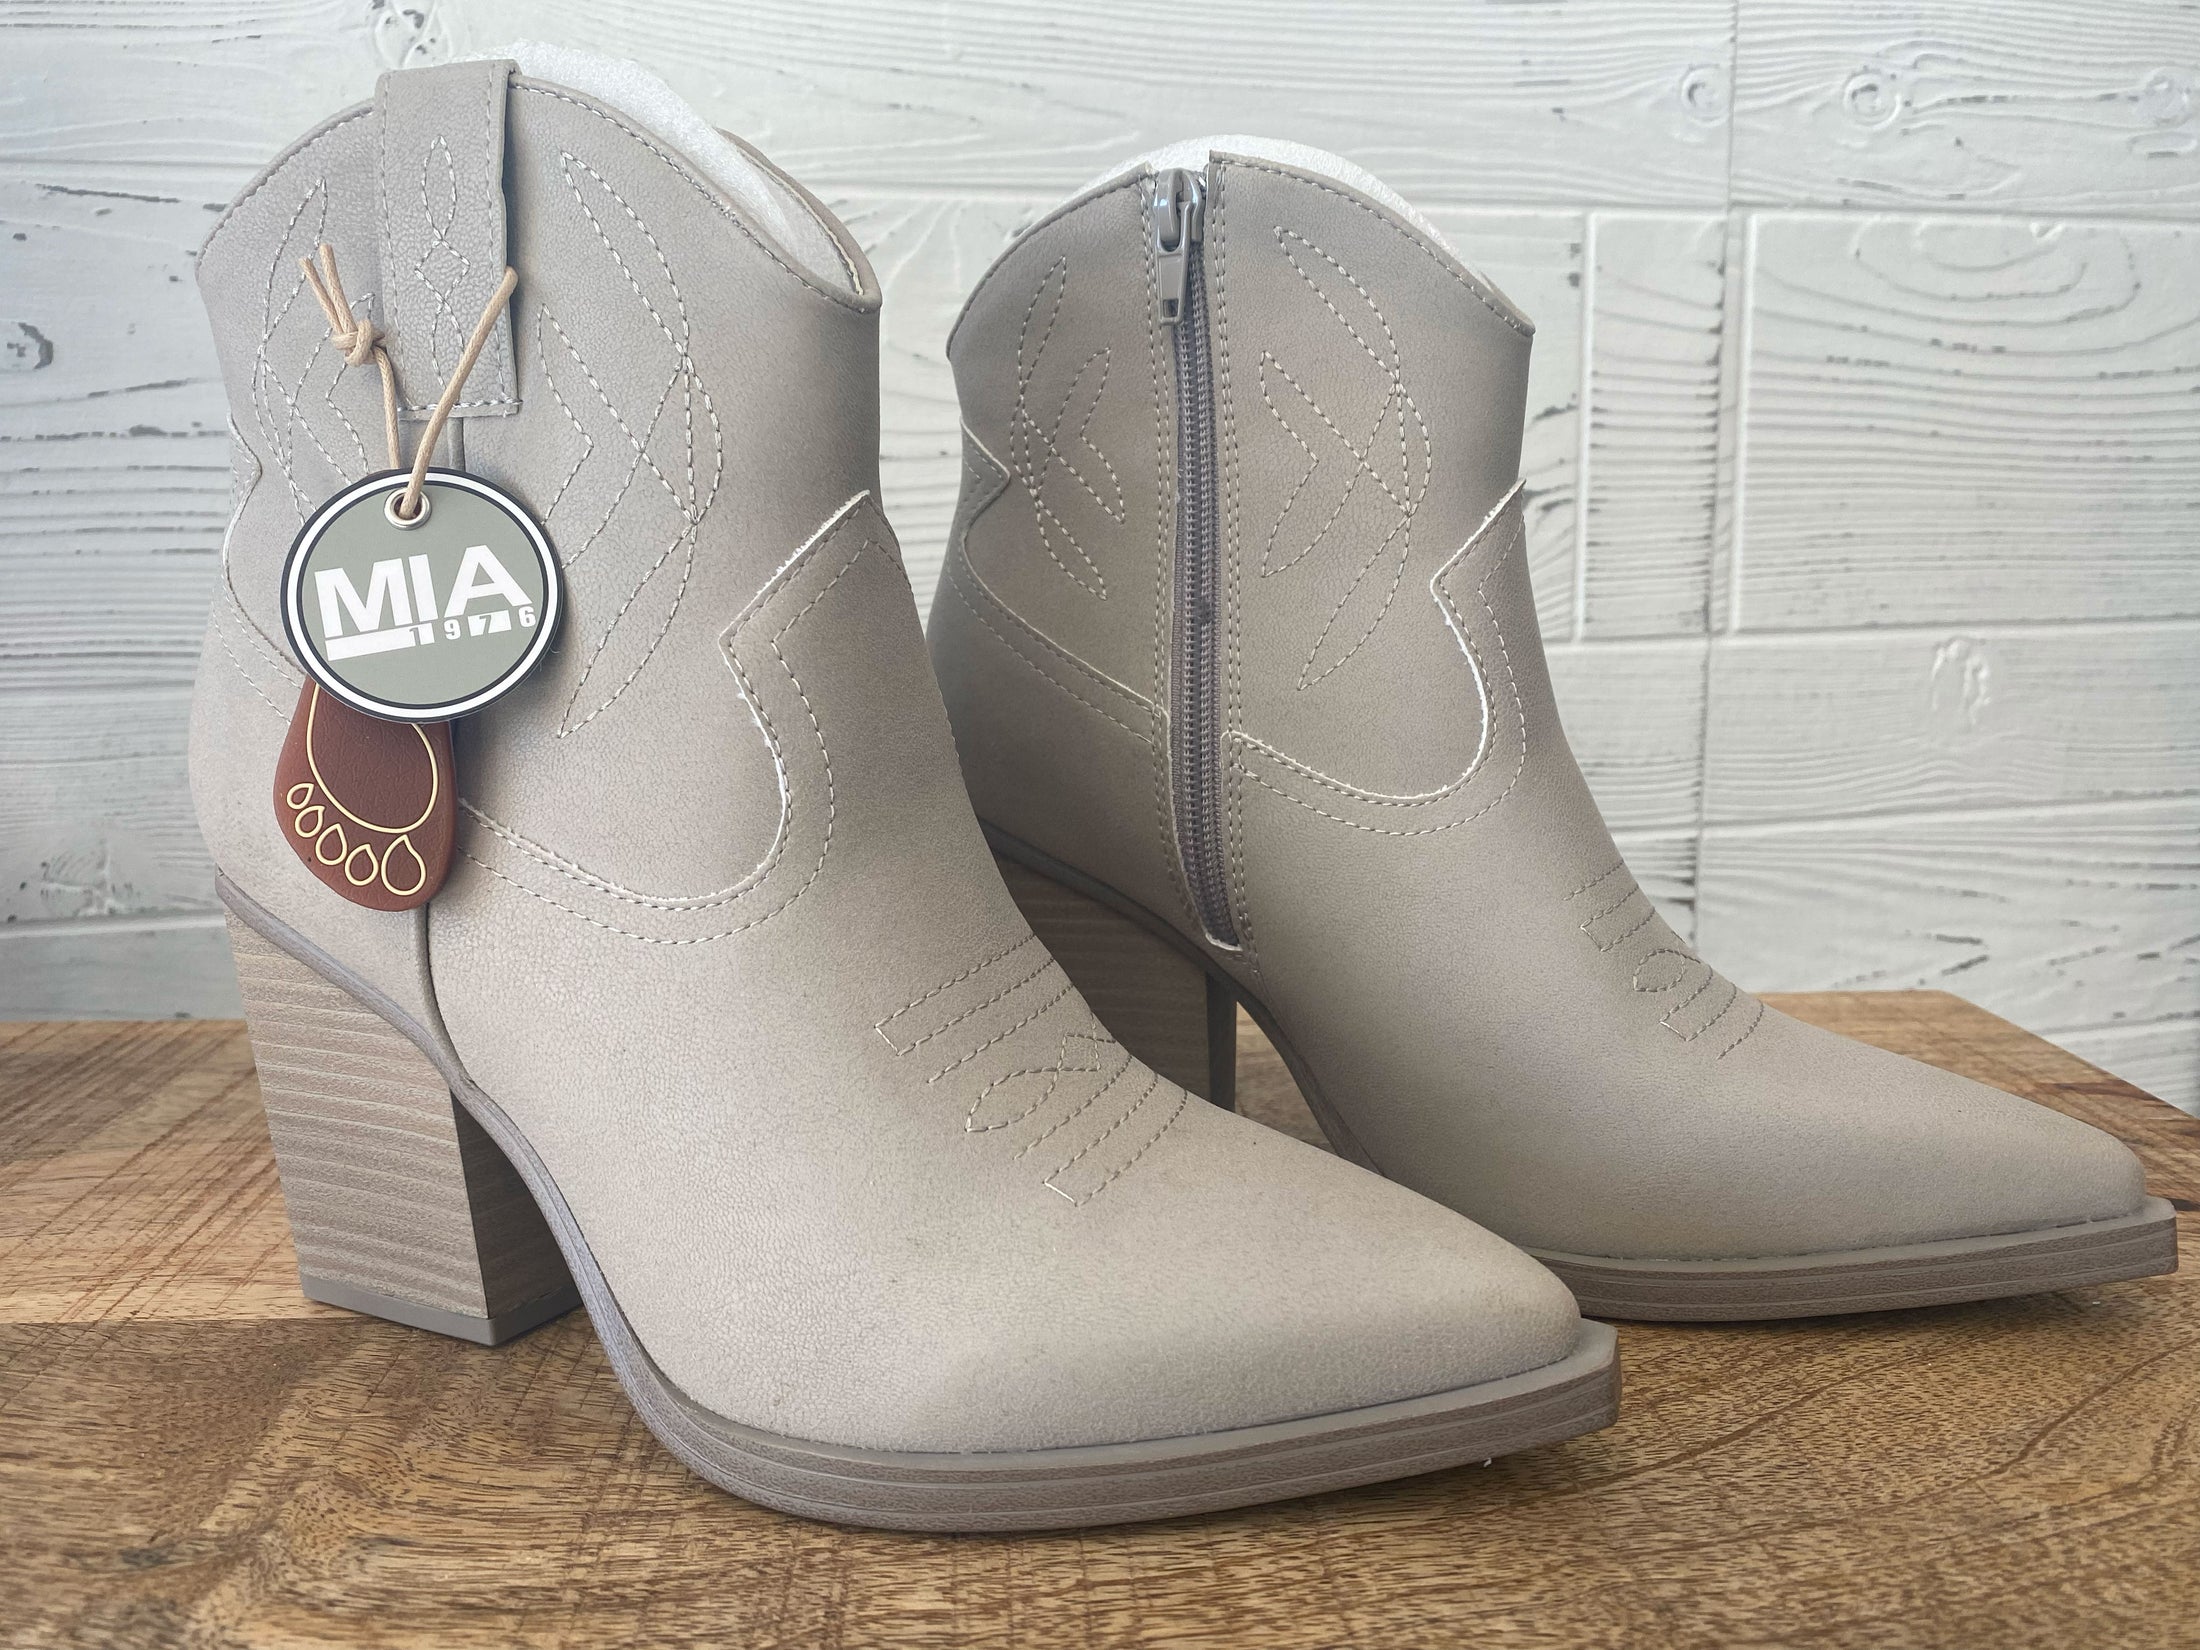 Mia Spring Boot, Ankle Boots, Ash Color